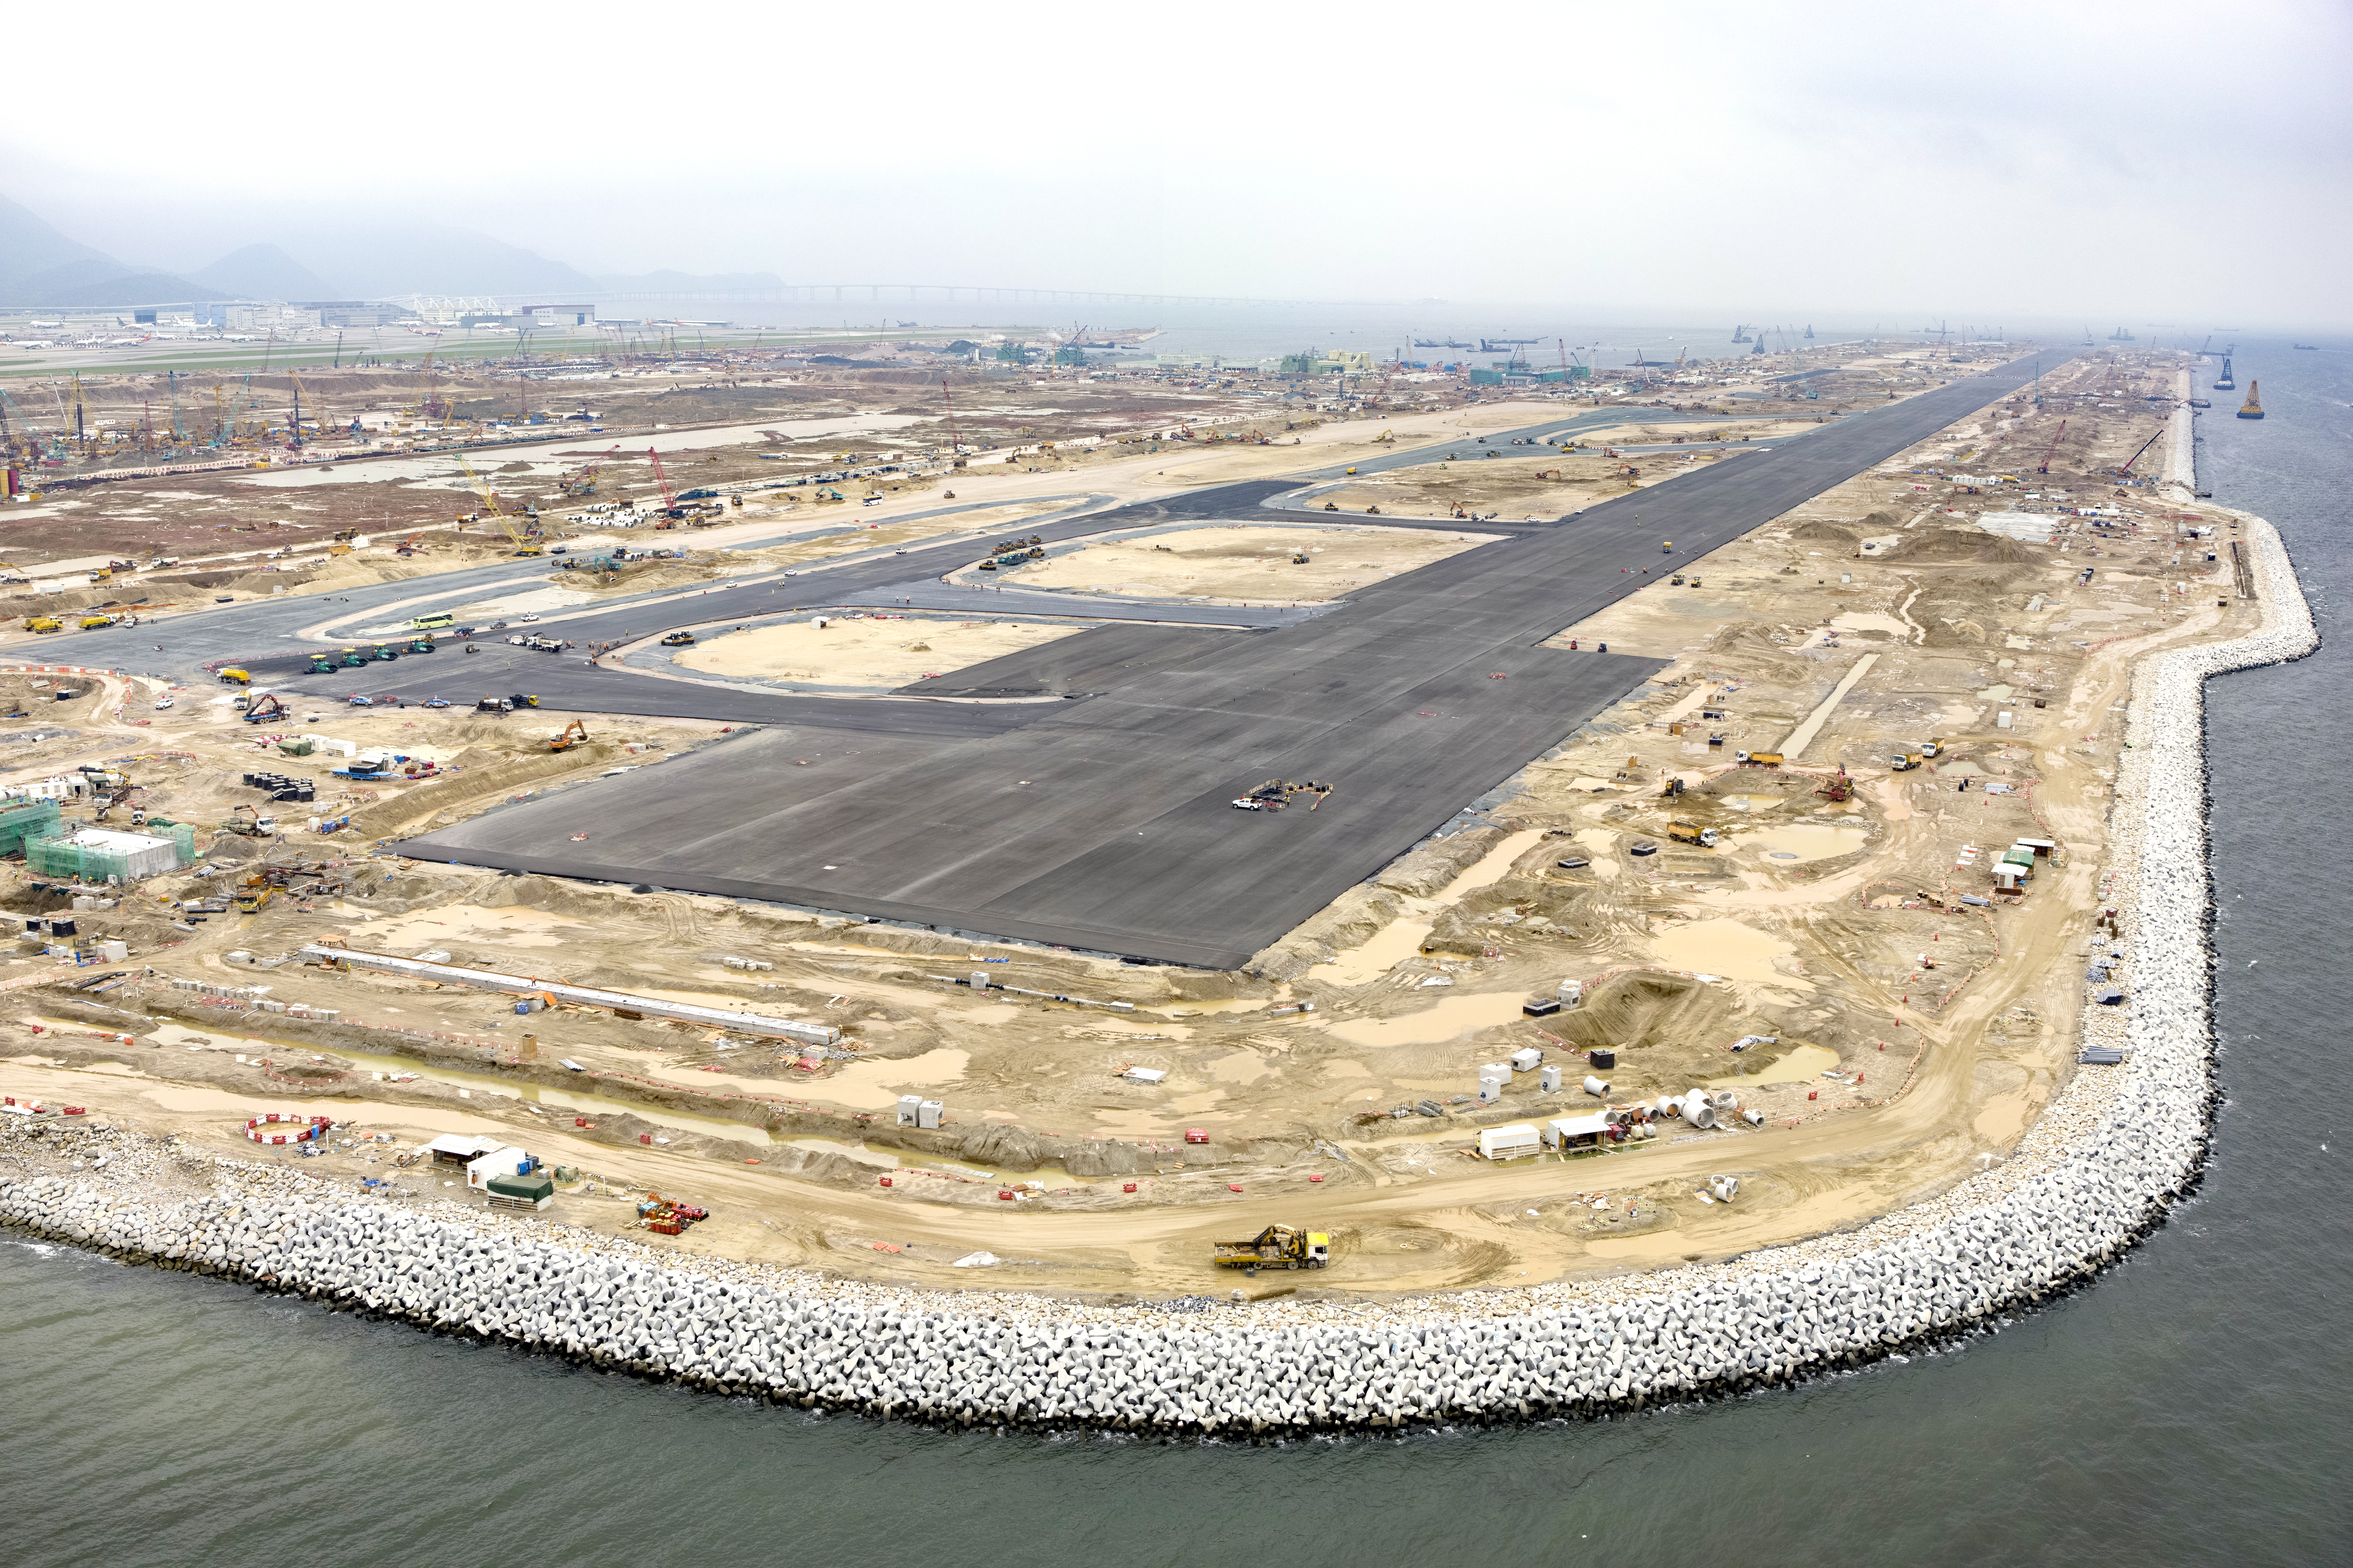 Pavement works of the Third Runway were completed in June 2021.